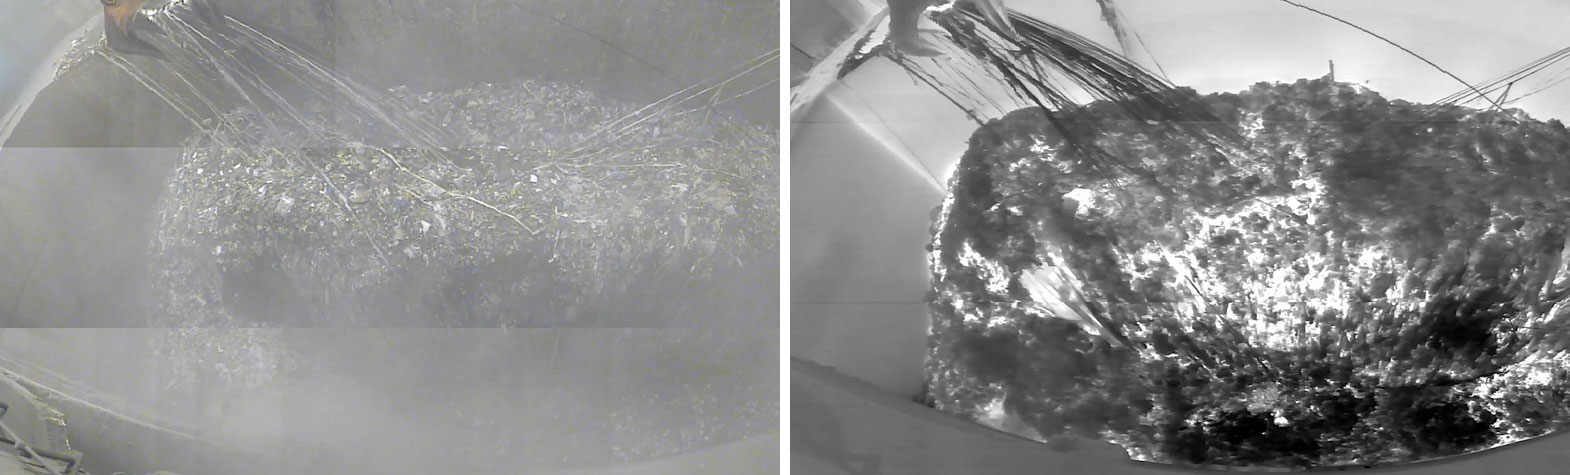 Waste bunker monitoring using video cameras and infrared cameras (thermal imaging cameras).